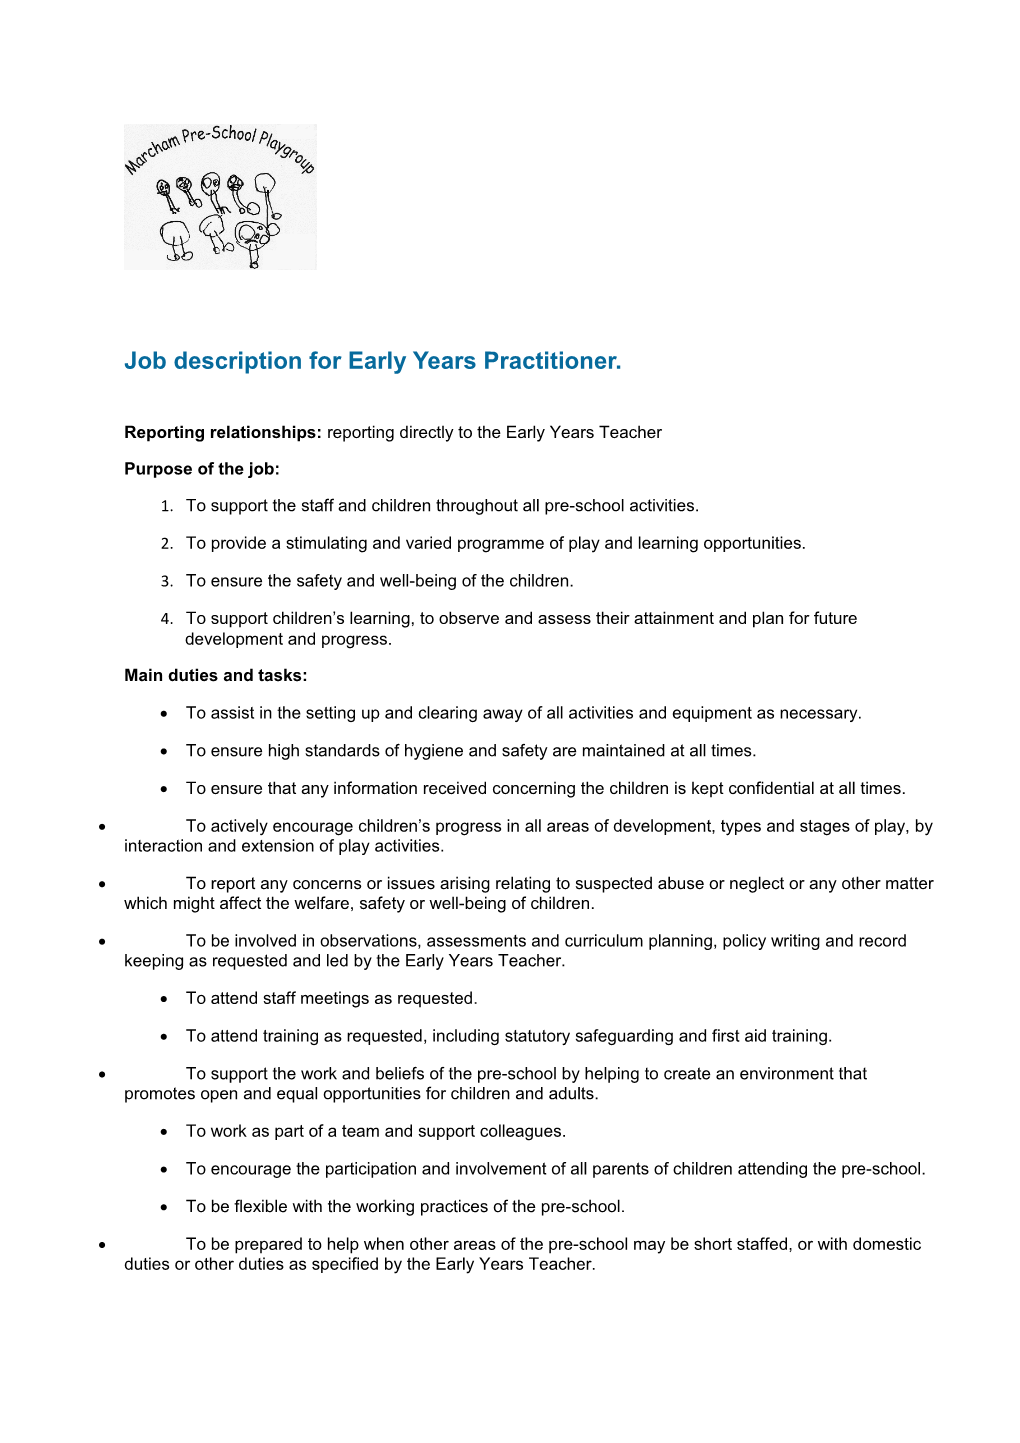 Job Description for Early Years Practitioner